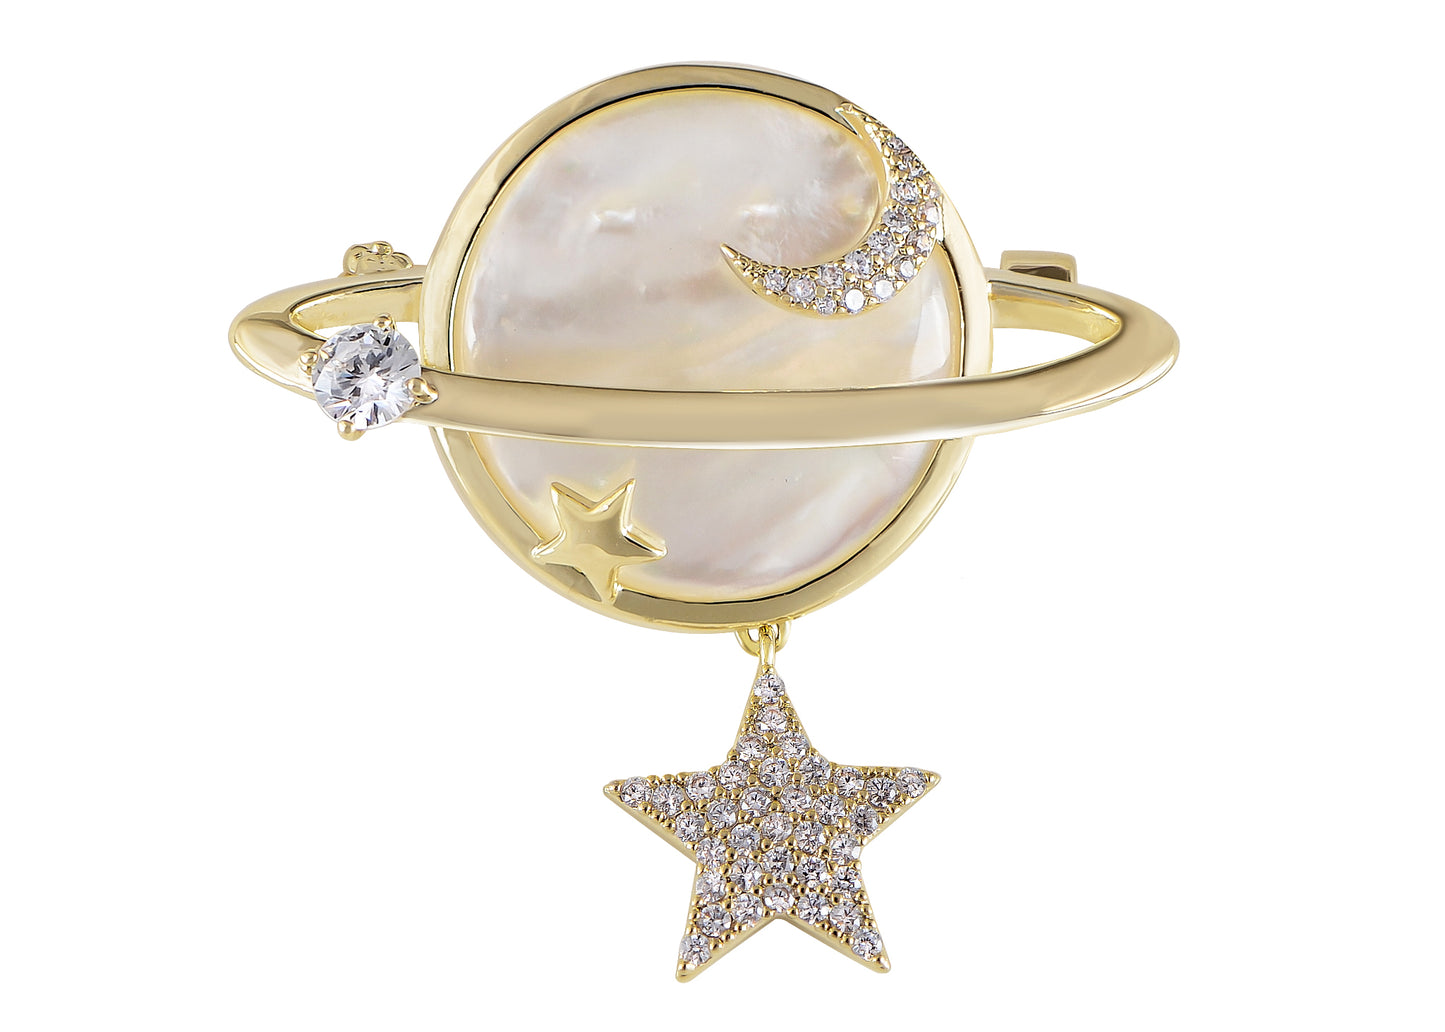 Alilang Golden Tone Earth Mirror Star And Crescent Moon Brooch Pin Natural Shell Zircon Brooch For Women Girls Jackets Jewelry Gifts